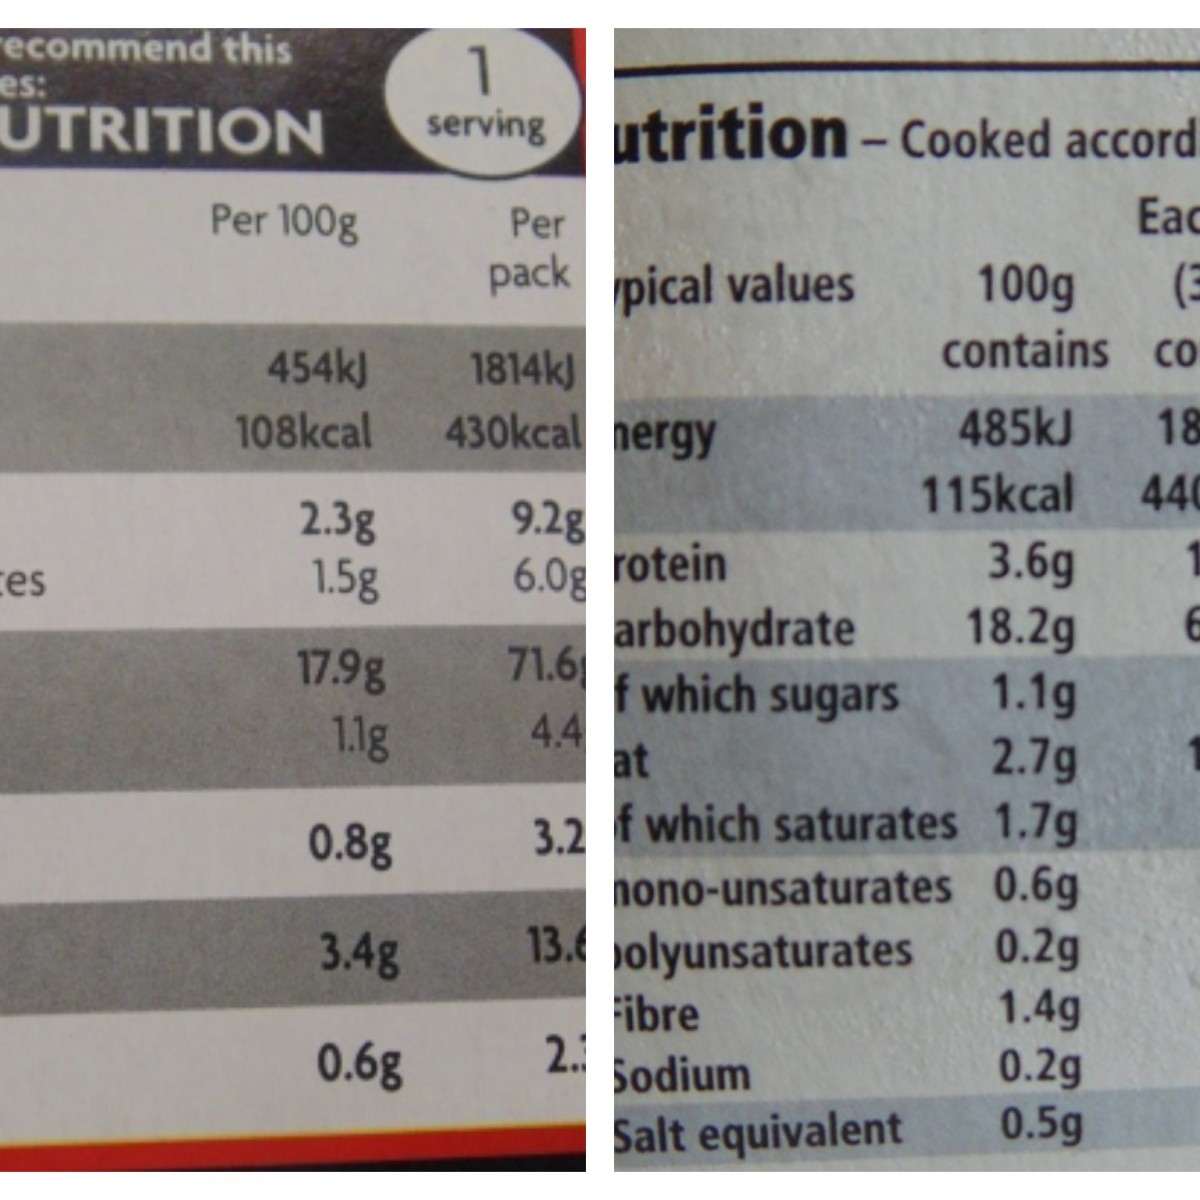 Ready Meal Monday - Comparison Between Asda (left) and Tesco (right) Macaroni Cheese Nutritional Information